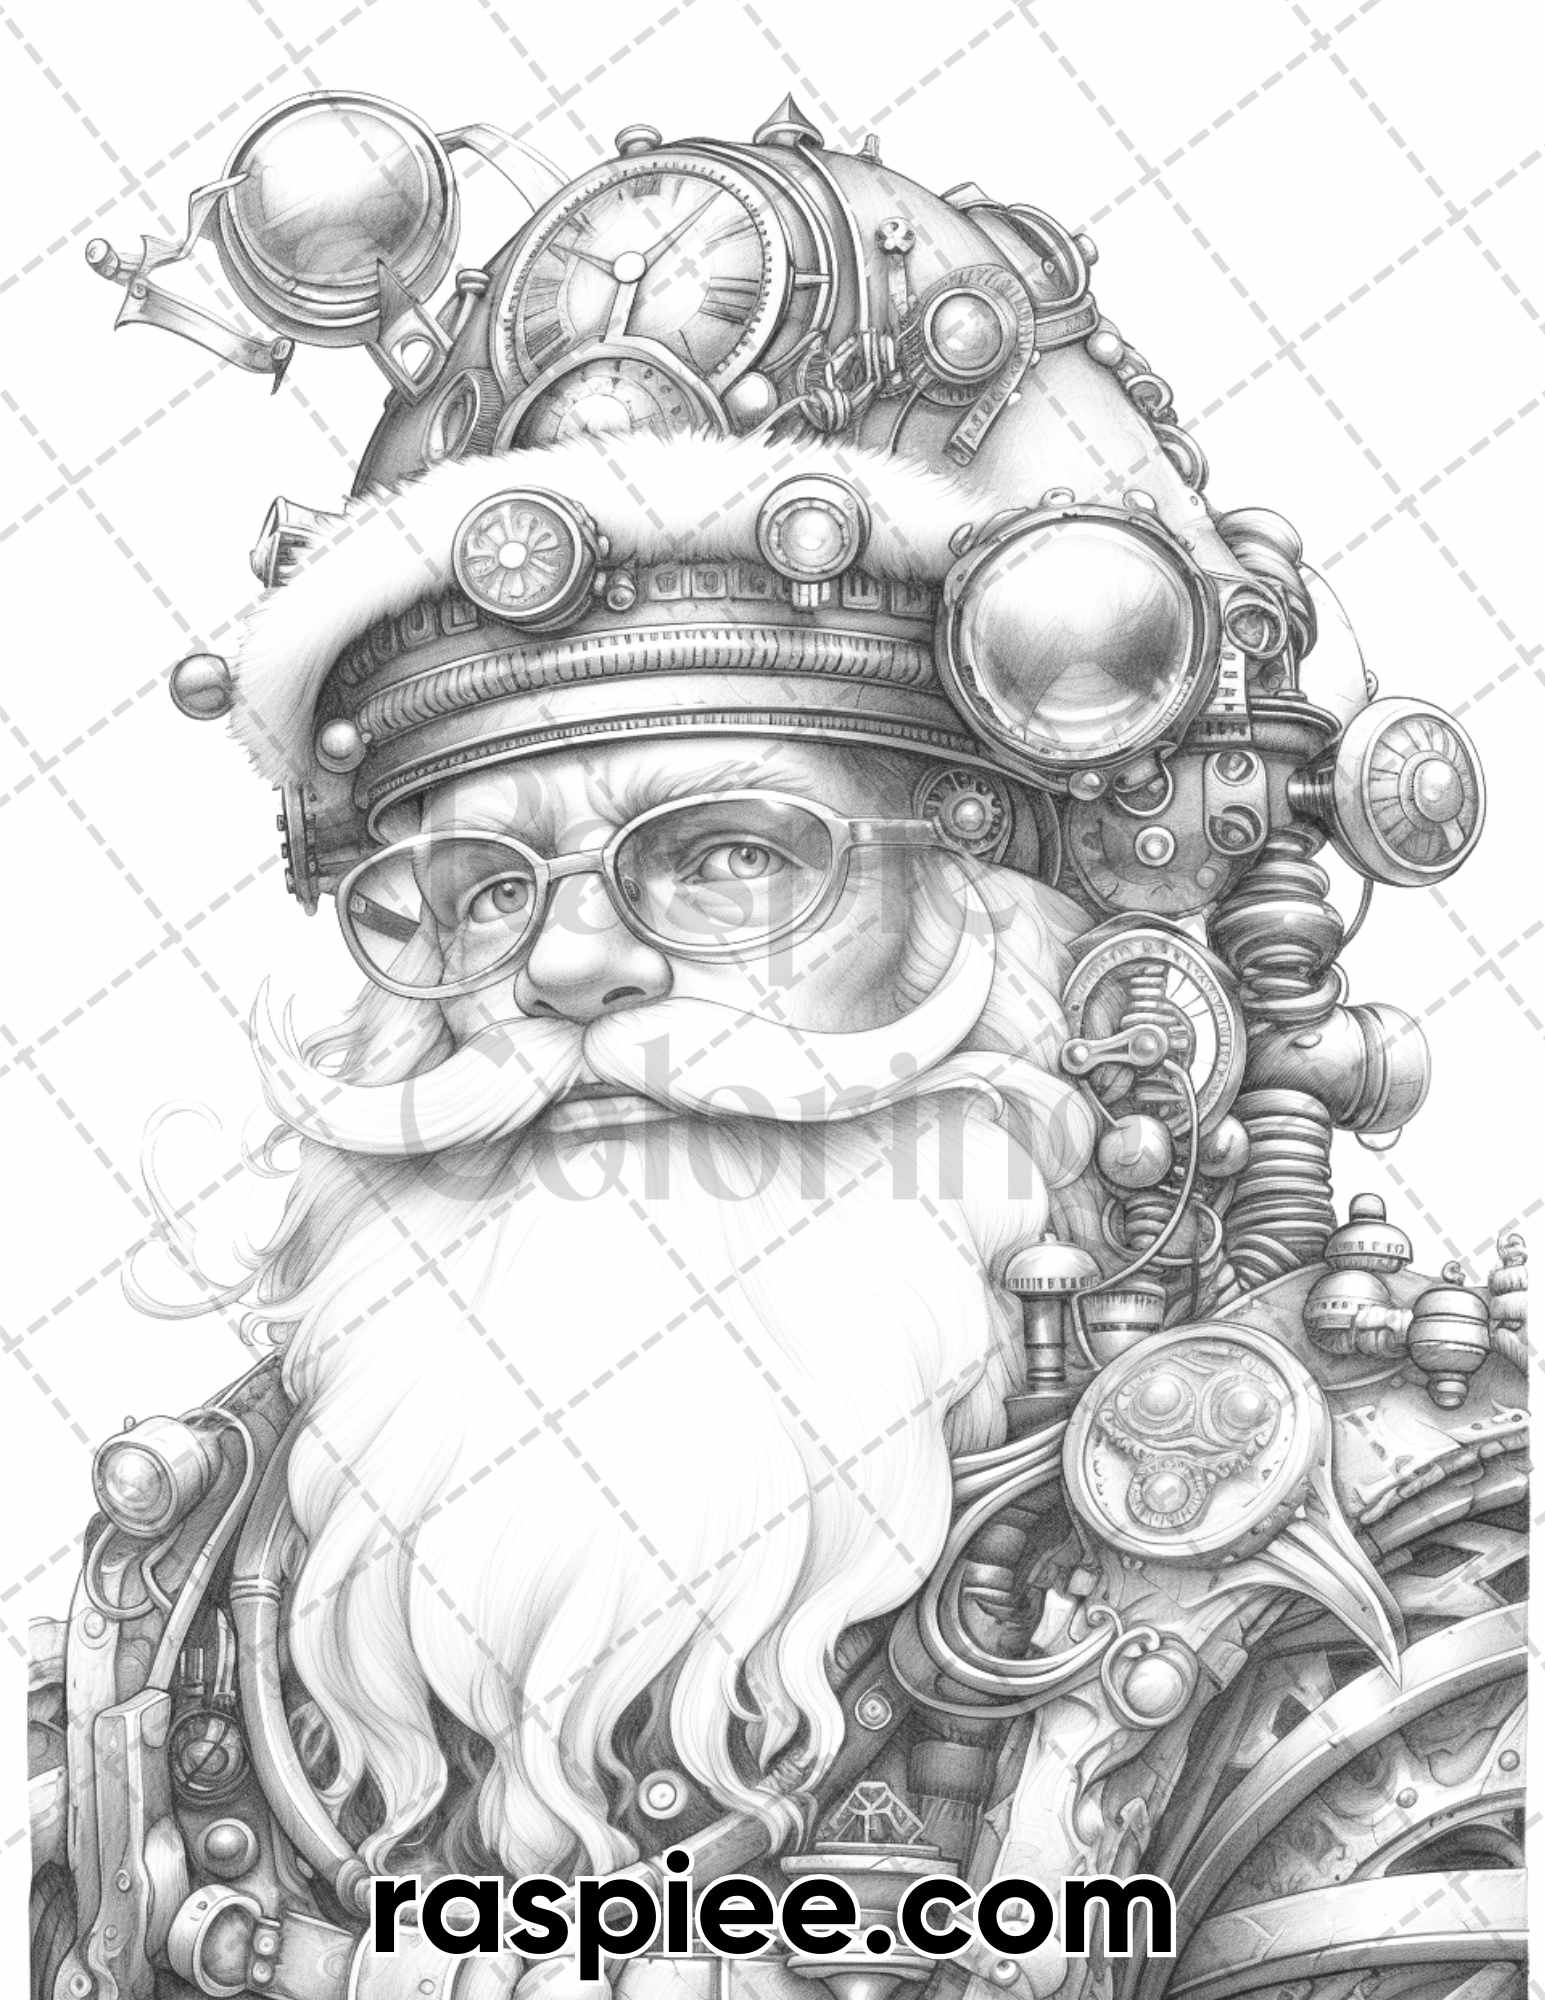 Steampunk Santa Claus Coloring Pages, Grayscale Coloring Pages for Adults, Adult Coloring Page Download, Christmas Coloring Pages, Christmas Coloring Pages for Adults, Xmas Coloring Pages, Portrait Coloring Pages for Adults, Steampunk Coloring Pages, Santa Claus Coloring Pages, Christmas Coloring Sheets